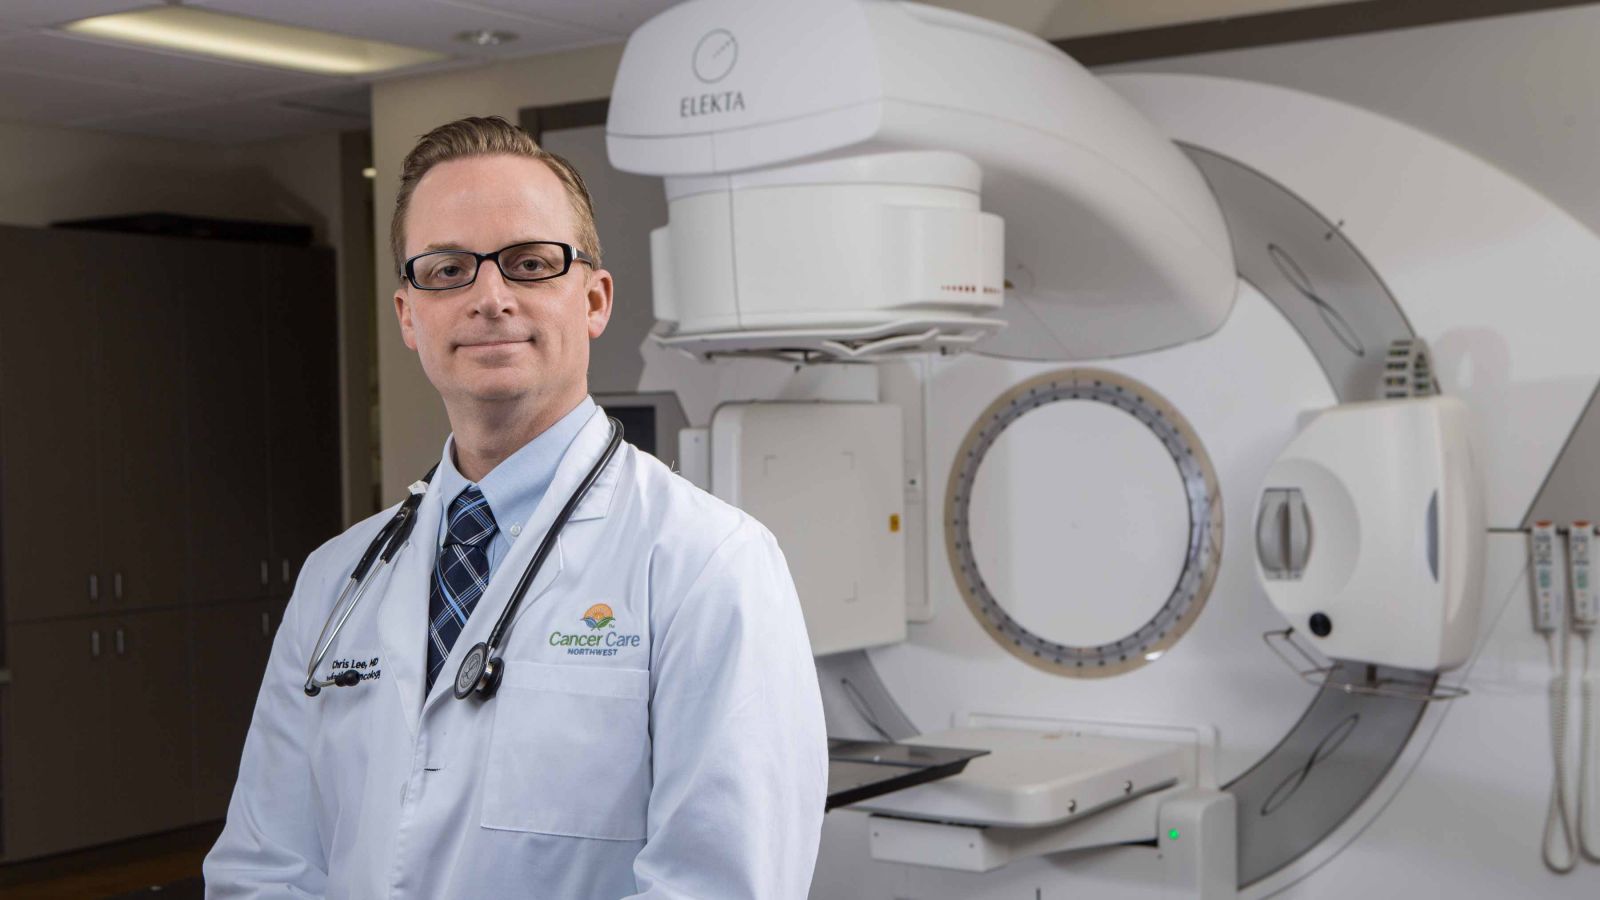 Radiation Oncologist, Dr. Christopher Lee, pictured with the Elekta LINAC, a state-of-the-art, image-guided radiation therapy system